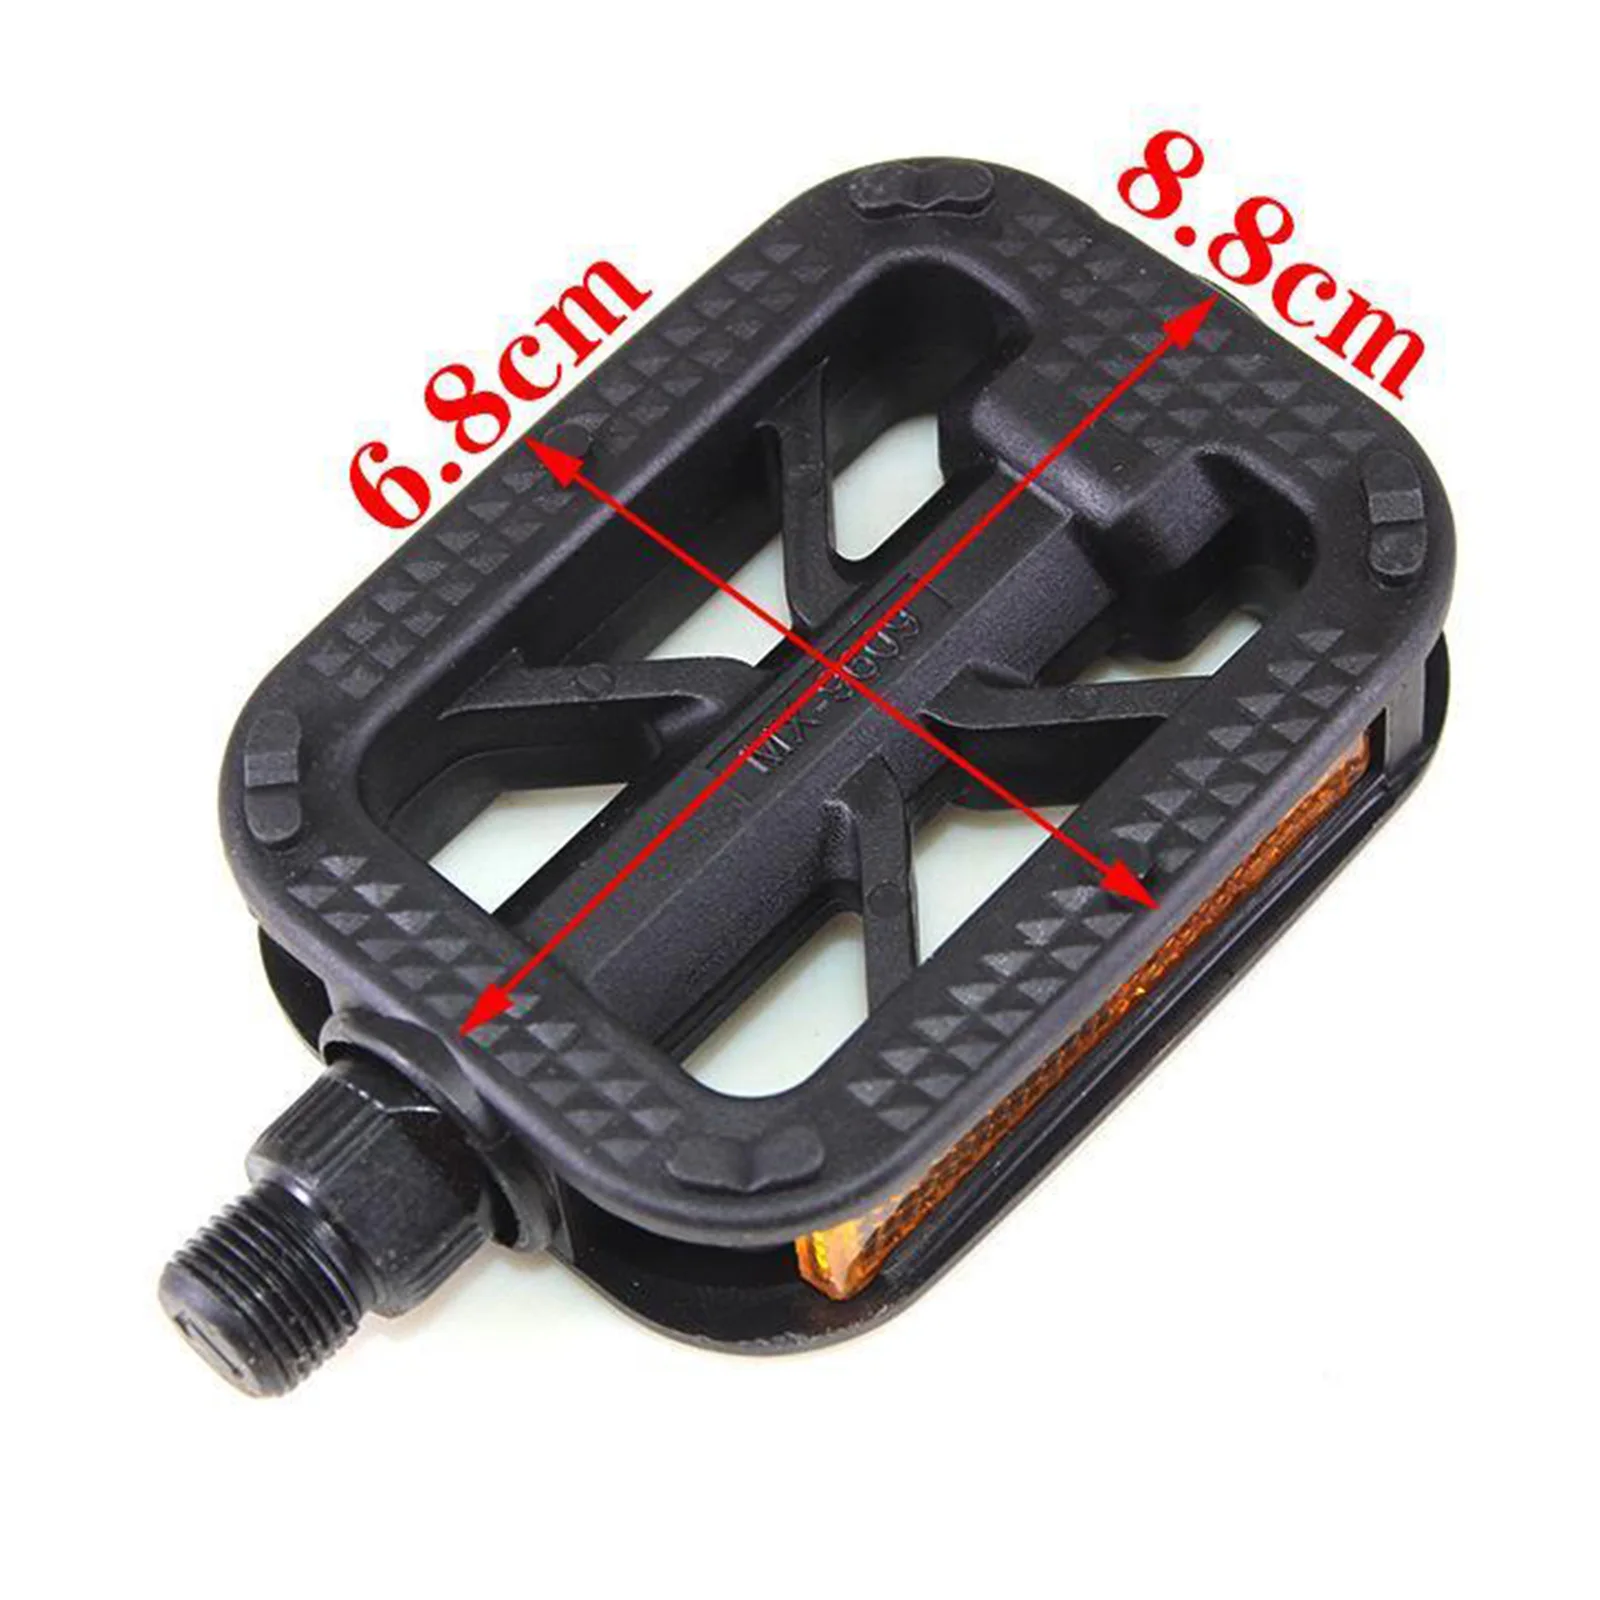 Bicycle Pedals Ultralight Flat Platform Bike Pedals for Mountain Bike 9/16 Inch 1/2 Inch Cycling Sealed DU Bearing Pedals images - 6